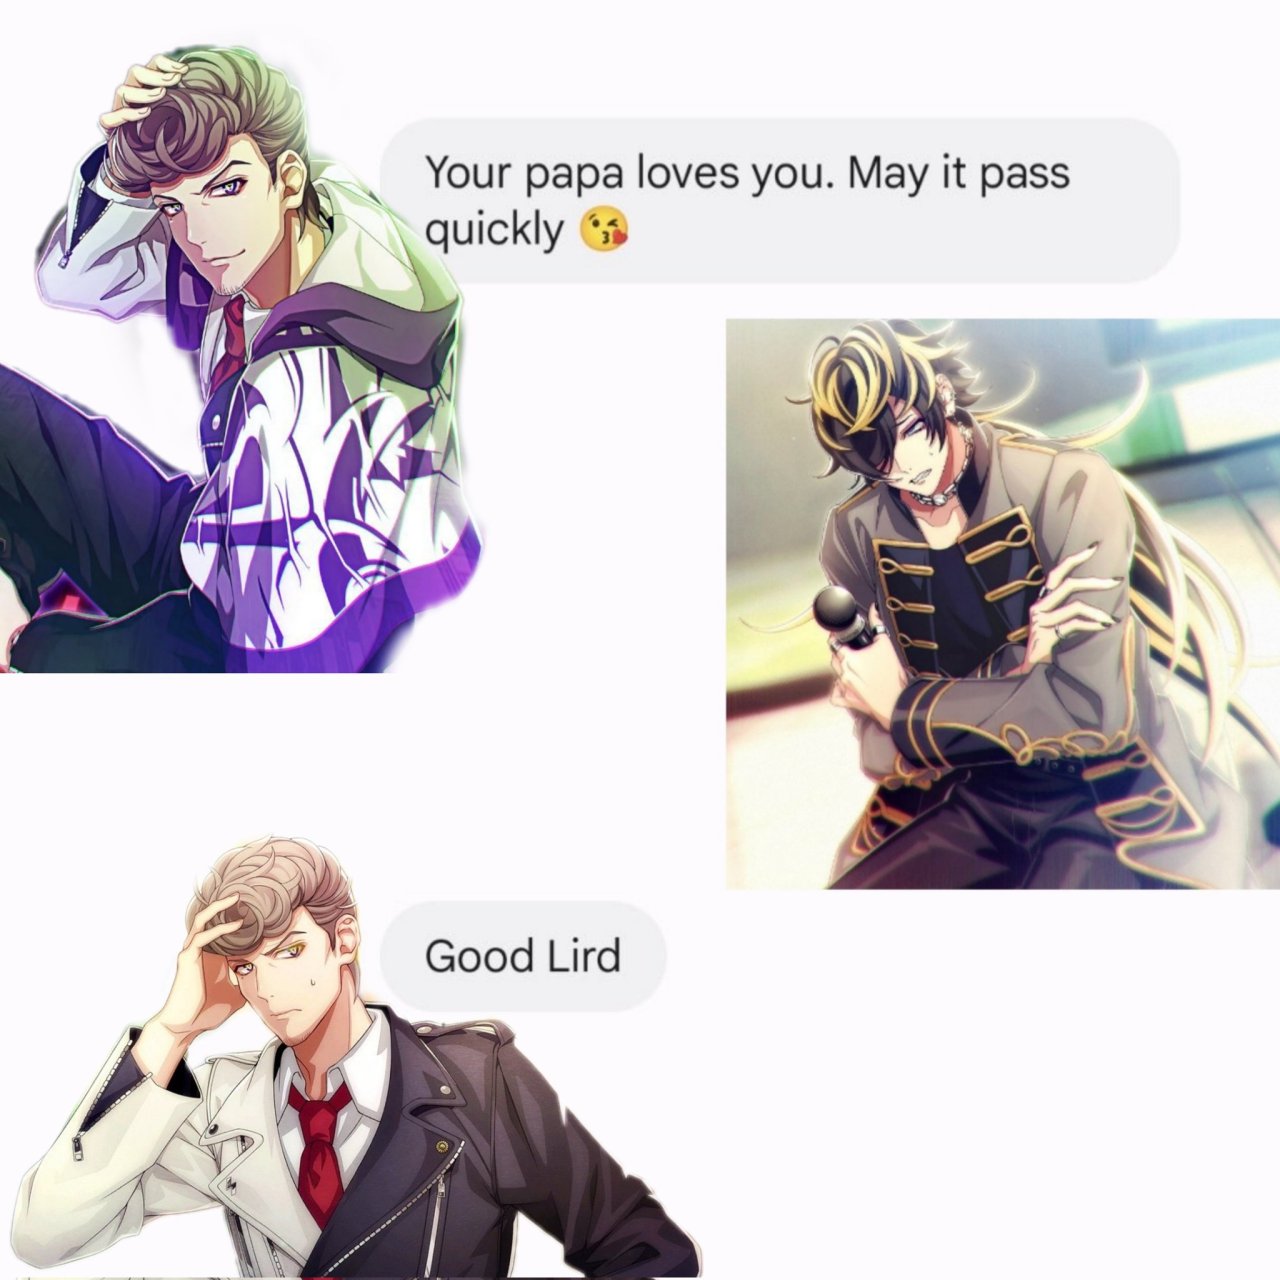 Badass Temple texting each other is ALWAYS chaotic you cannot change my mind #mine#hypmic#hypnosis mic#badass temple#kuko harai#jyushi aimono#hitoya amaguni#harai kuko#aimono jyushi#amaguni hitoya #they r so silly and i would do anything for them